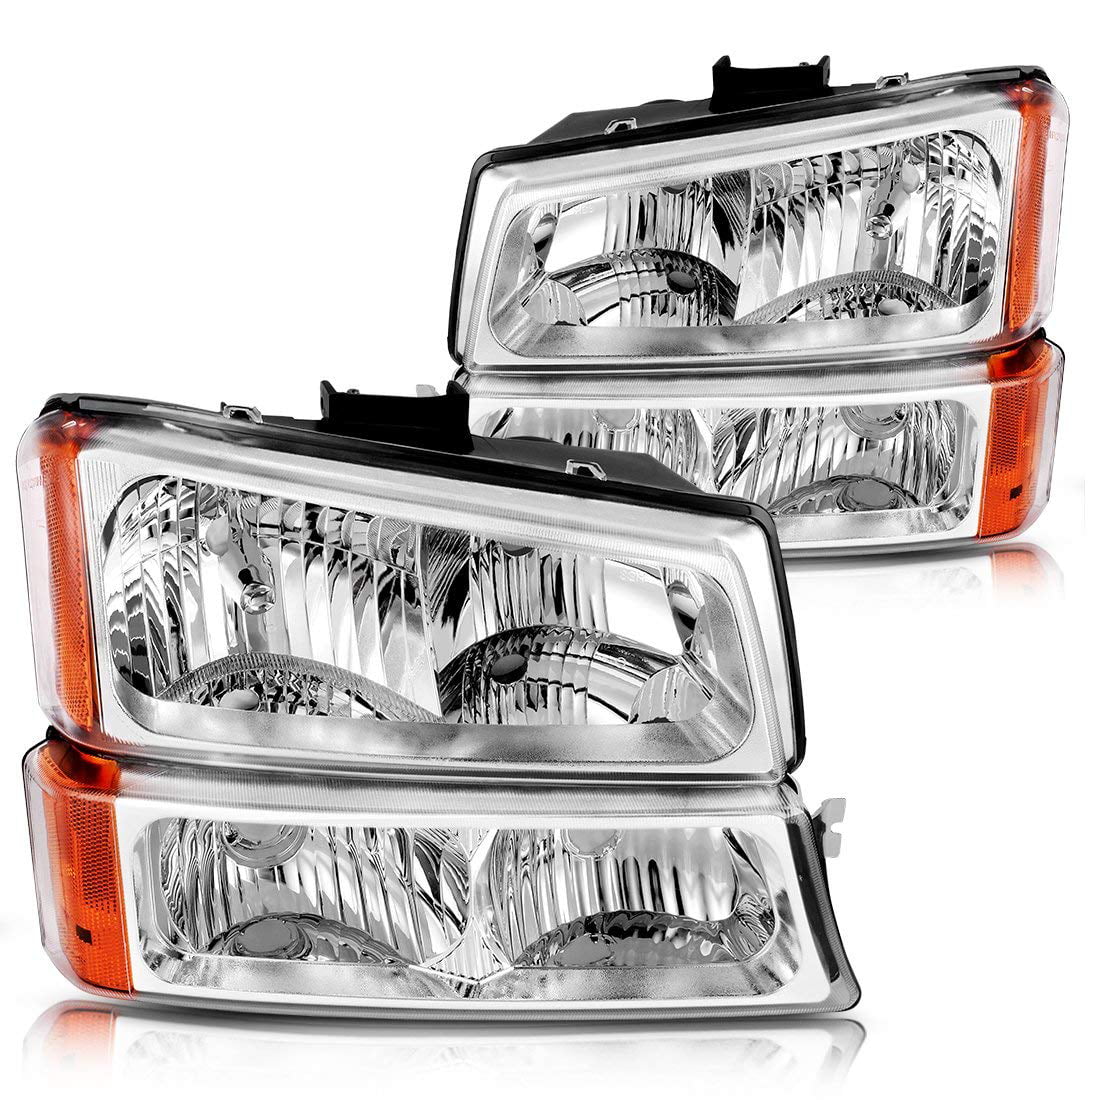 Headlights Assembly For 2003-2006 Chevrolet Silverado 1500 2500 3500 Lamp Clear